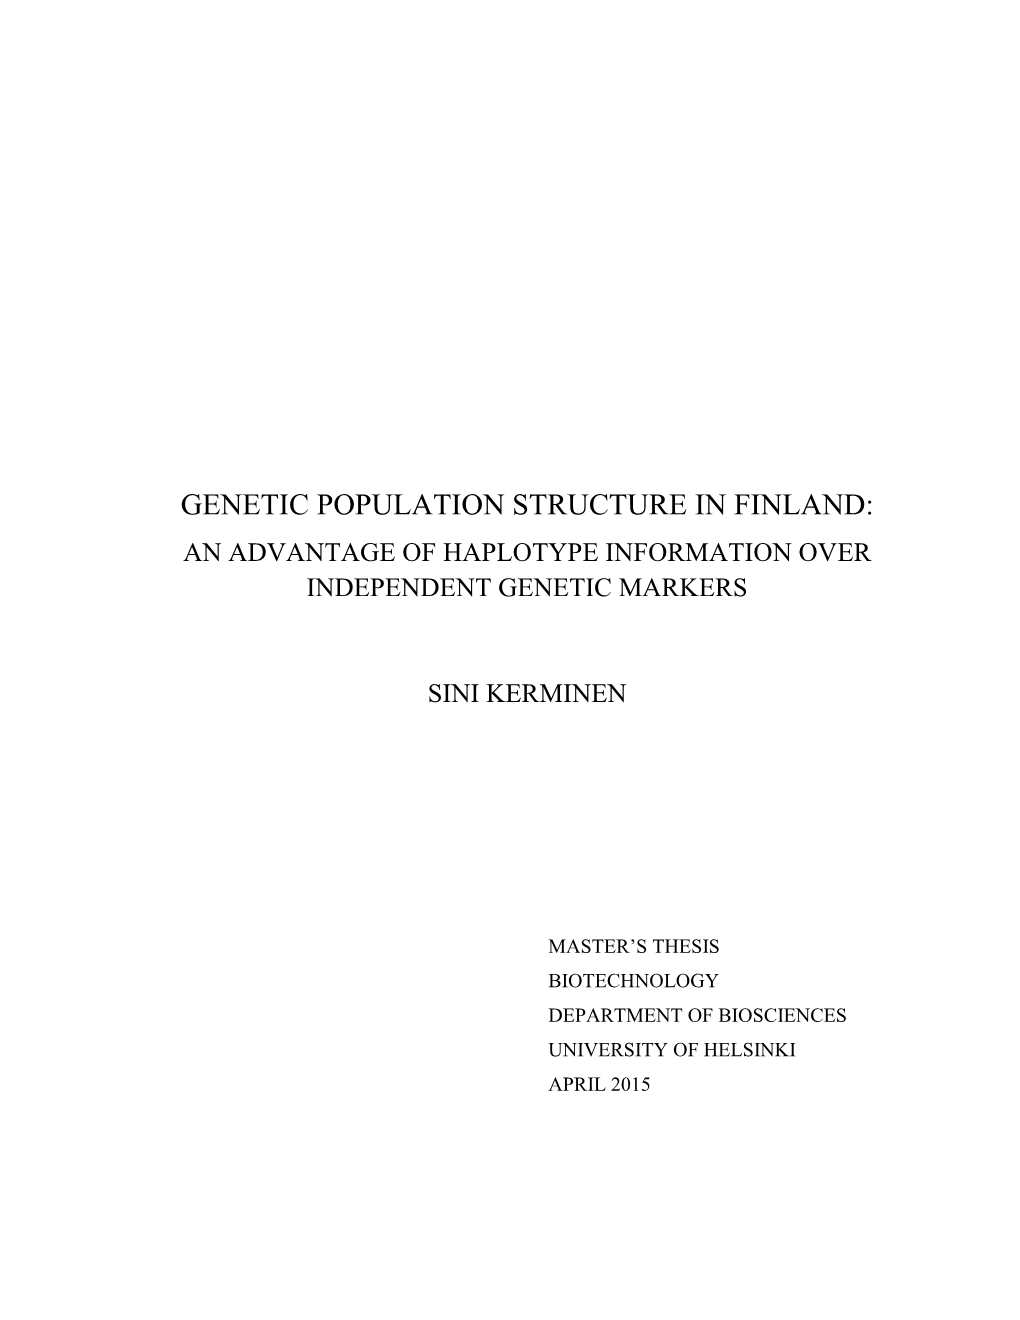 Genetic Population Structure in Finland: an Advantage of Haplotype Information Over Independent Genetic Markers